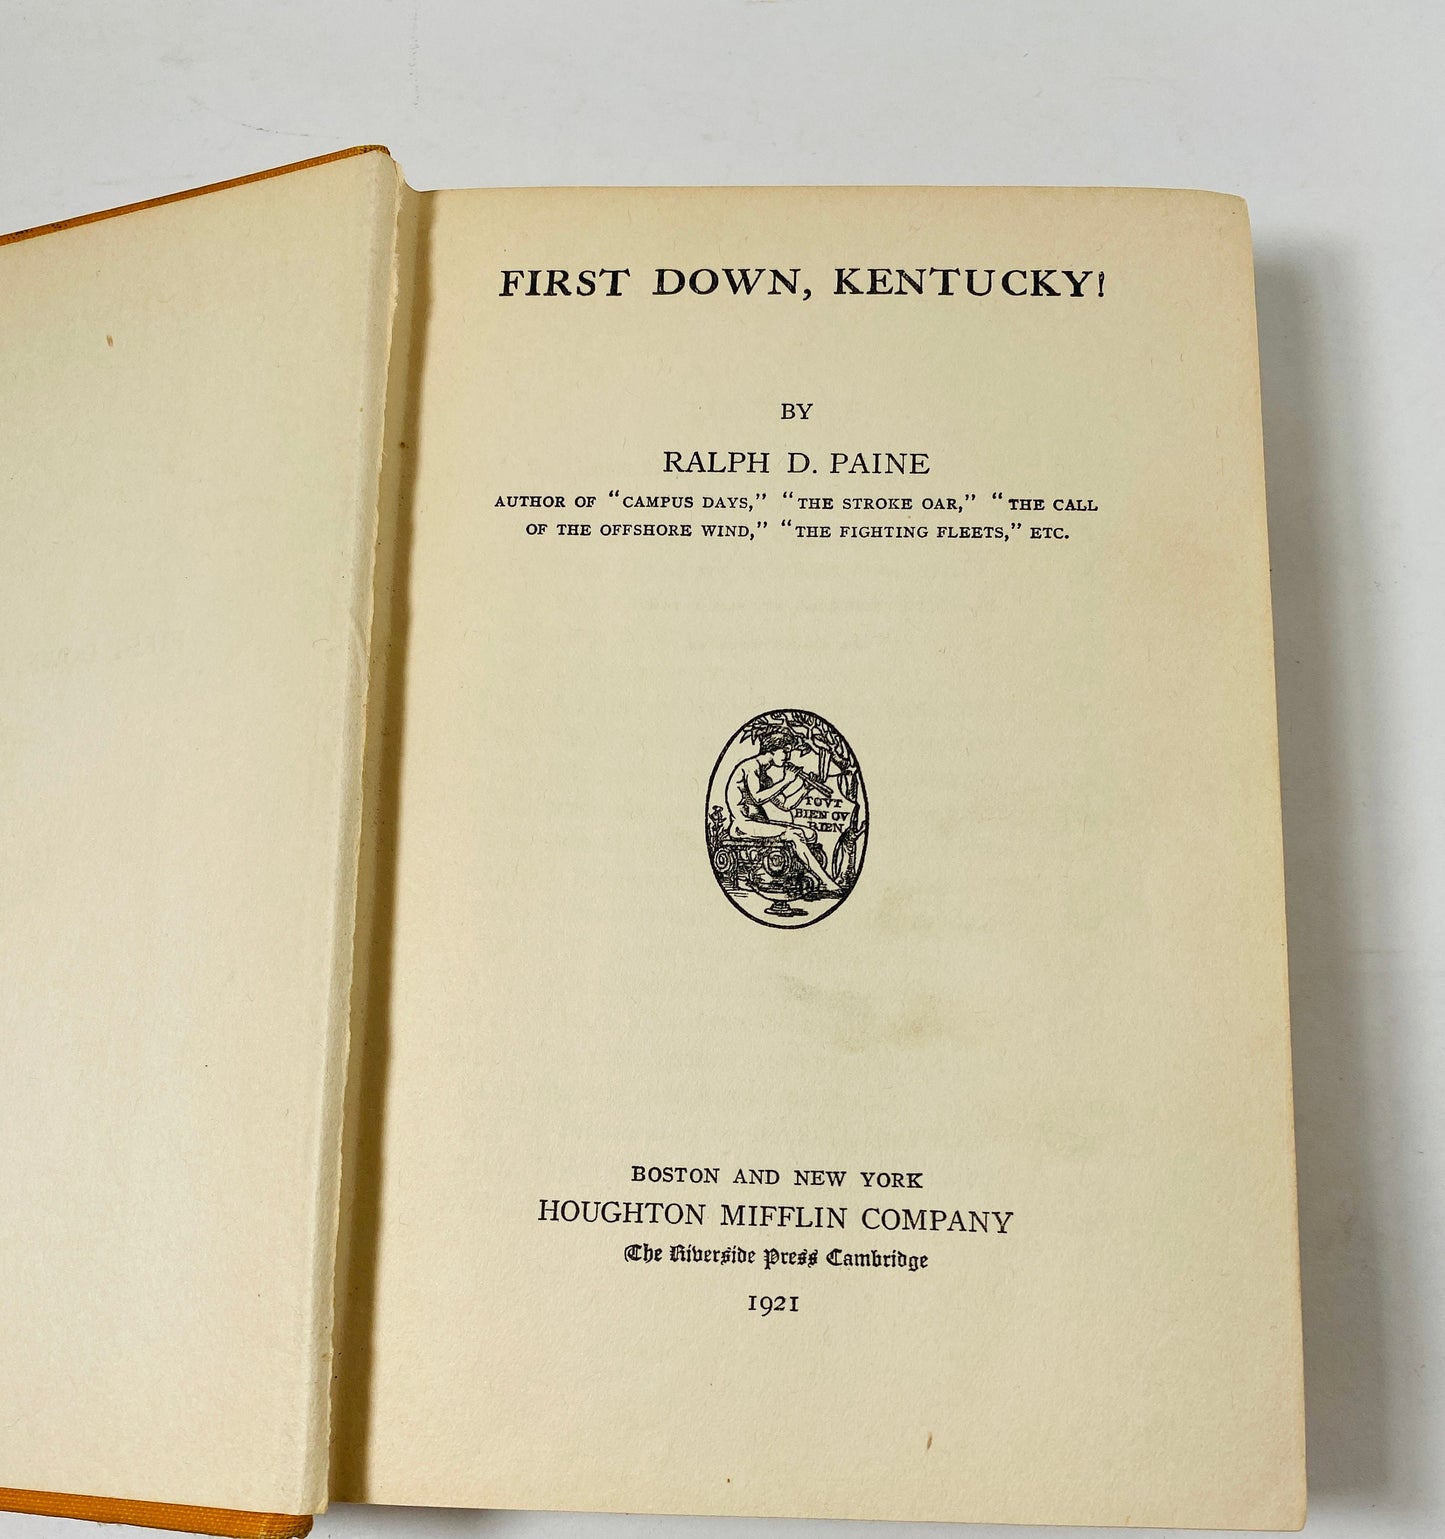 First Down Kentucky Vintage book circa 1921 by Ralph Paine Roaring 20s Flapper Pre-Depression Coming of Age story of football and romance